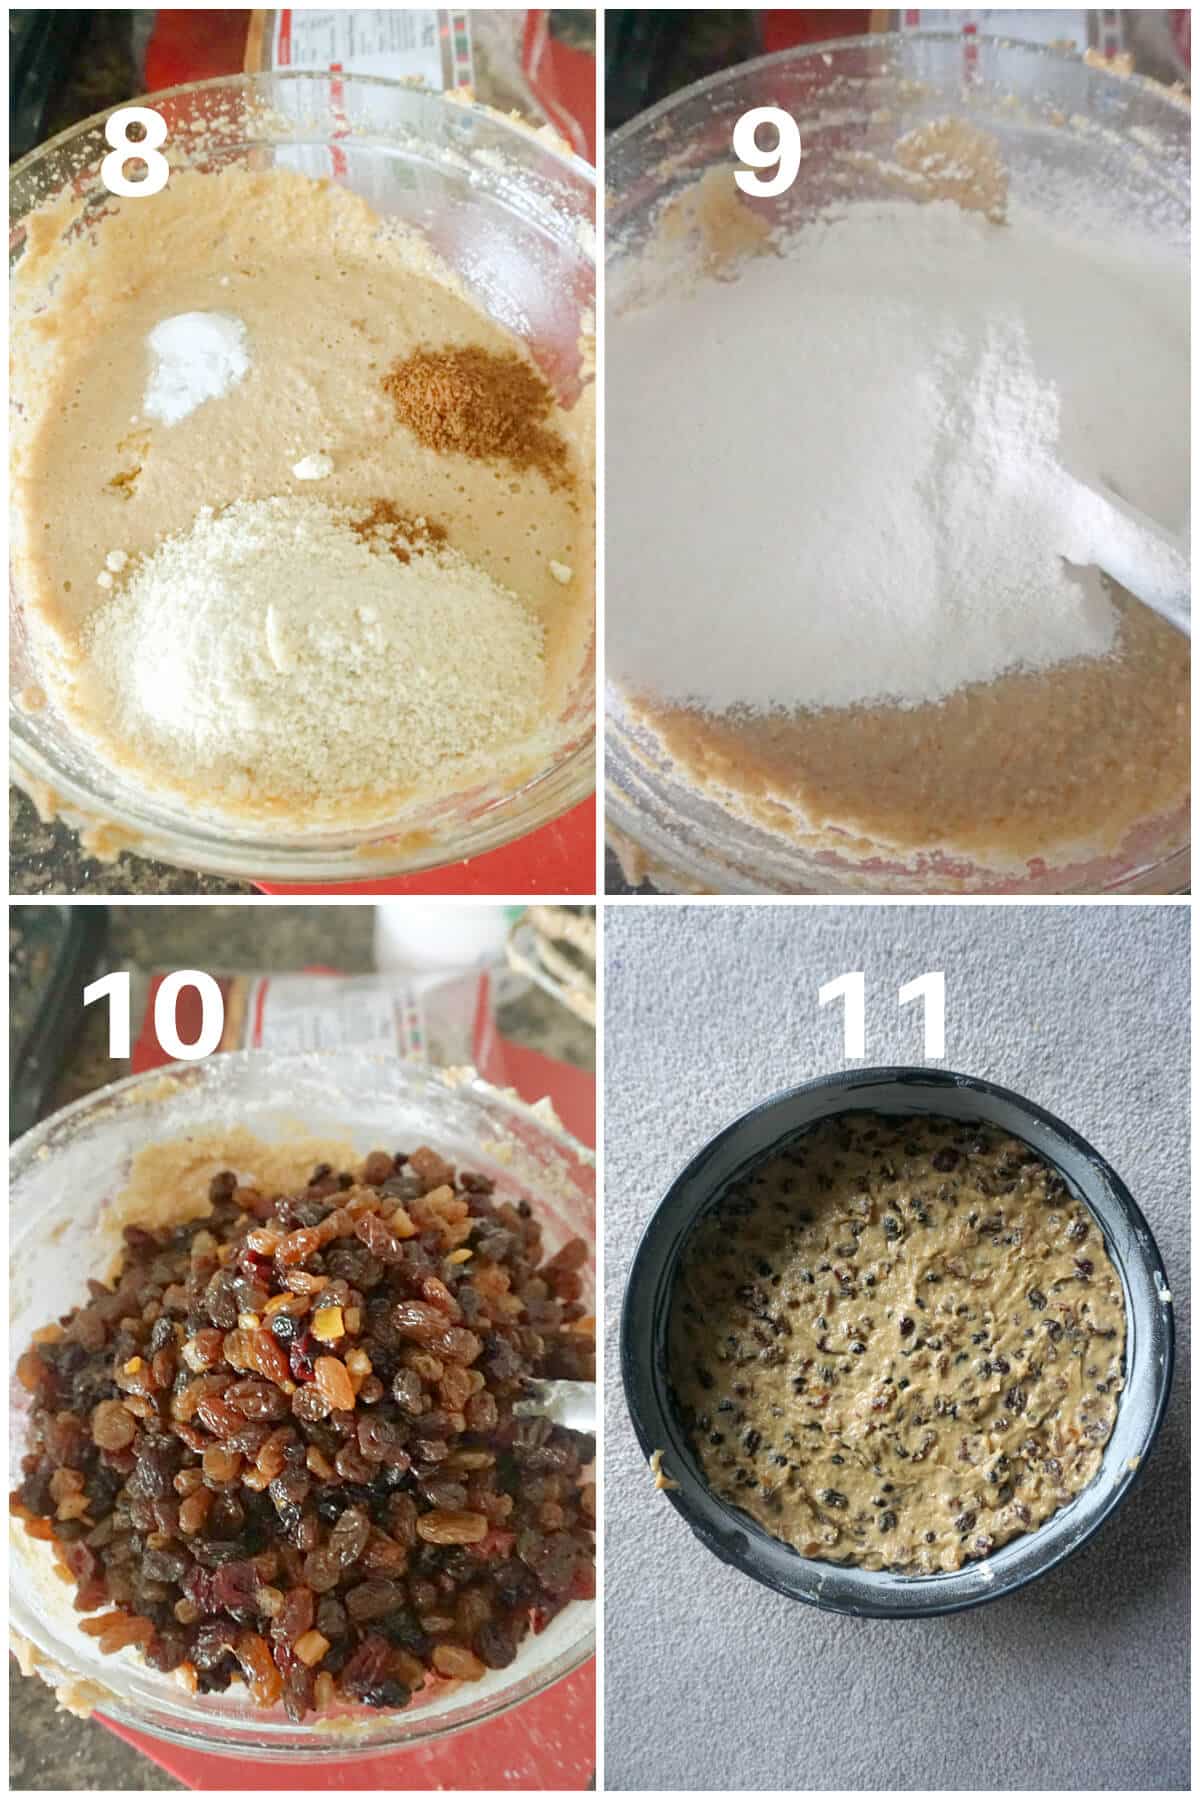 Collage of 4 photos to show how to make fruit cake for Christmas.